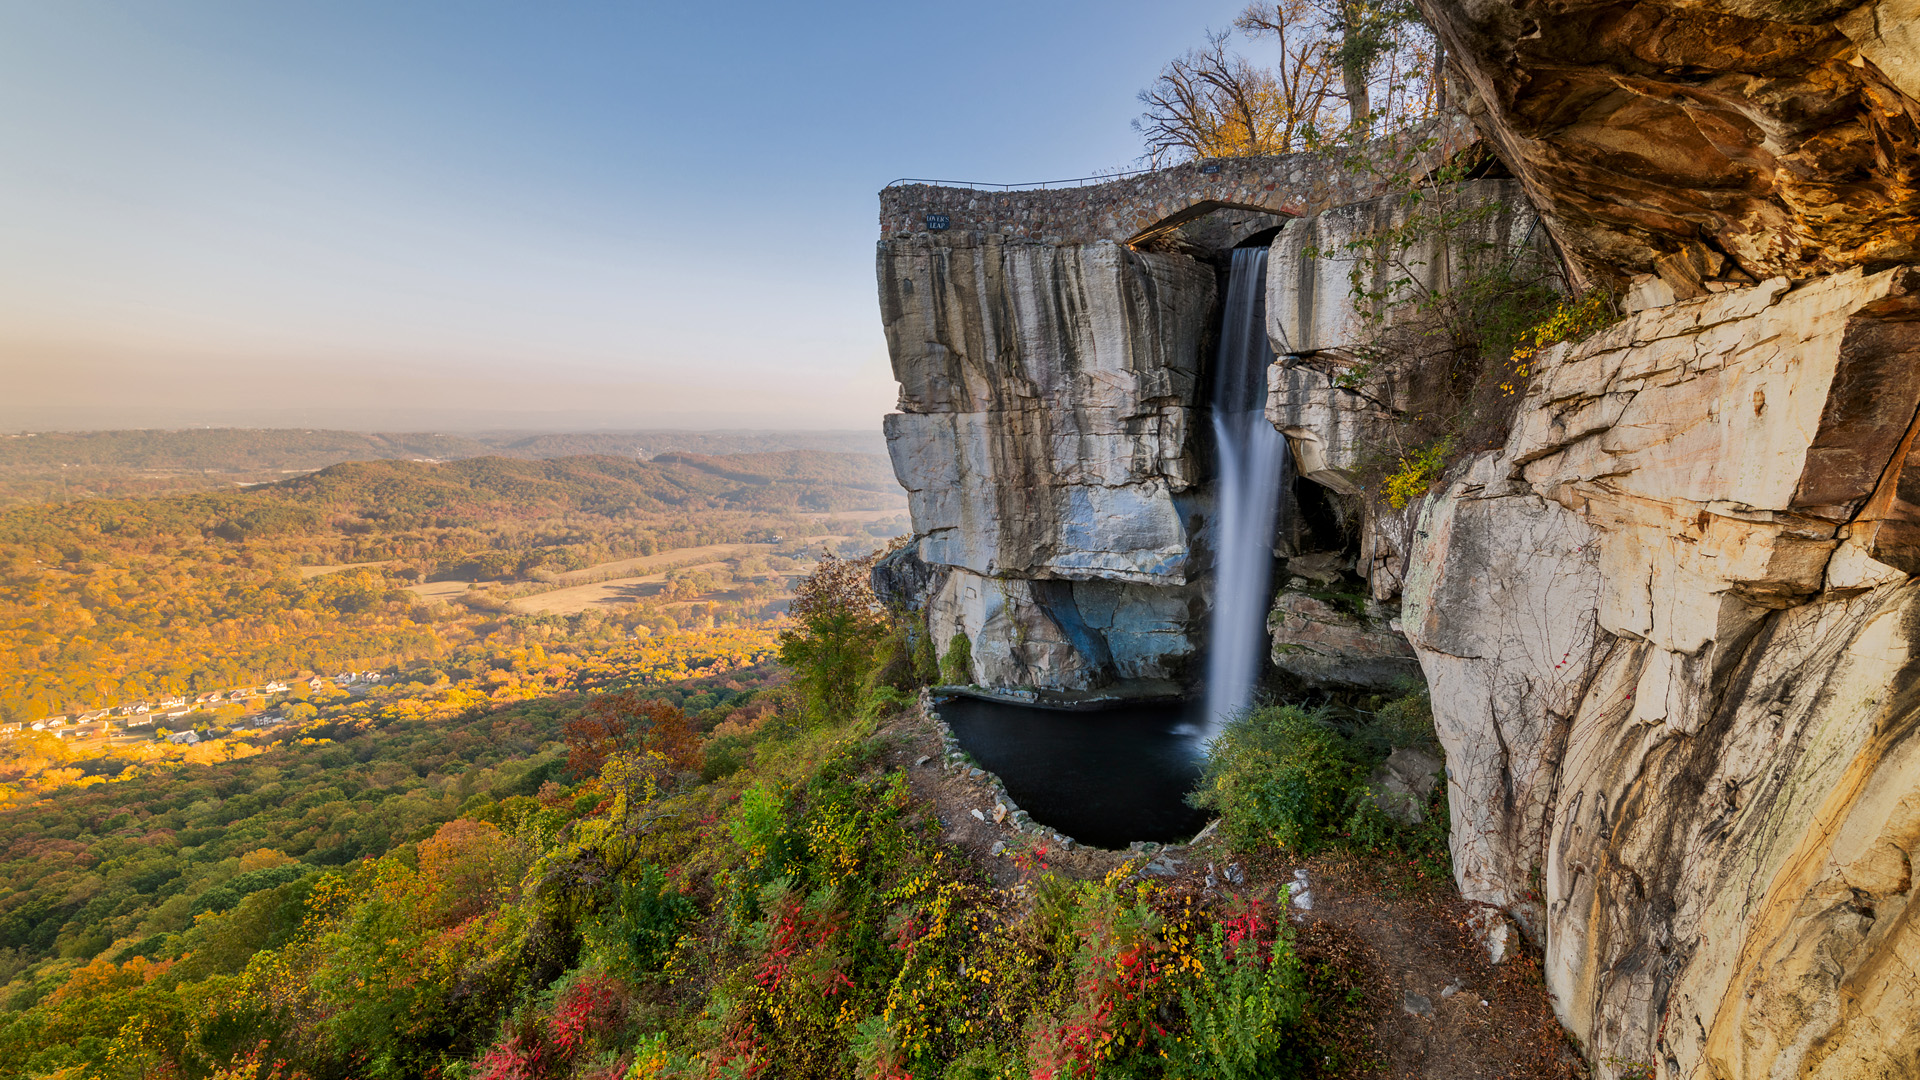 General 1920x1080 nature landscape horizon trees forest plants water waterfall sky mountains rocks long exposure far view fall Lookout Mountain Georgia USA